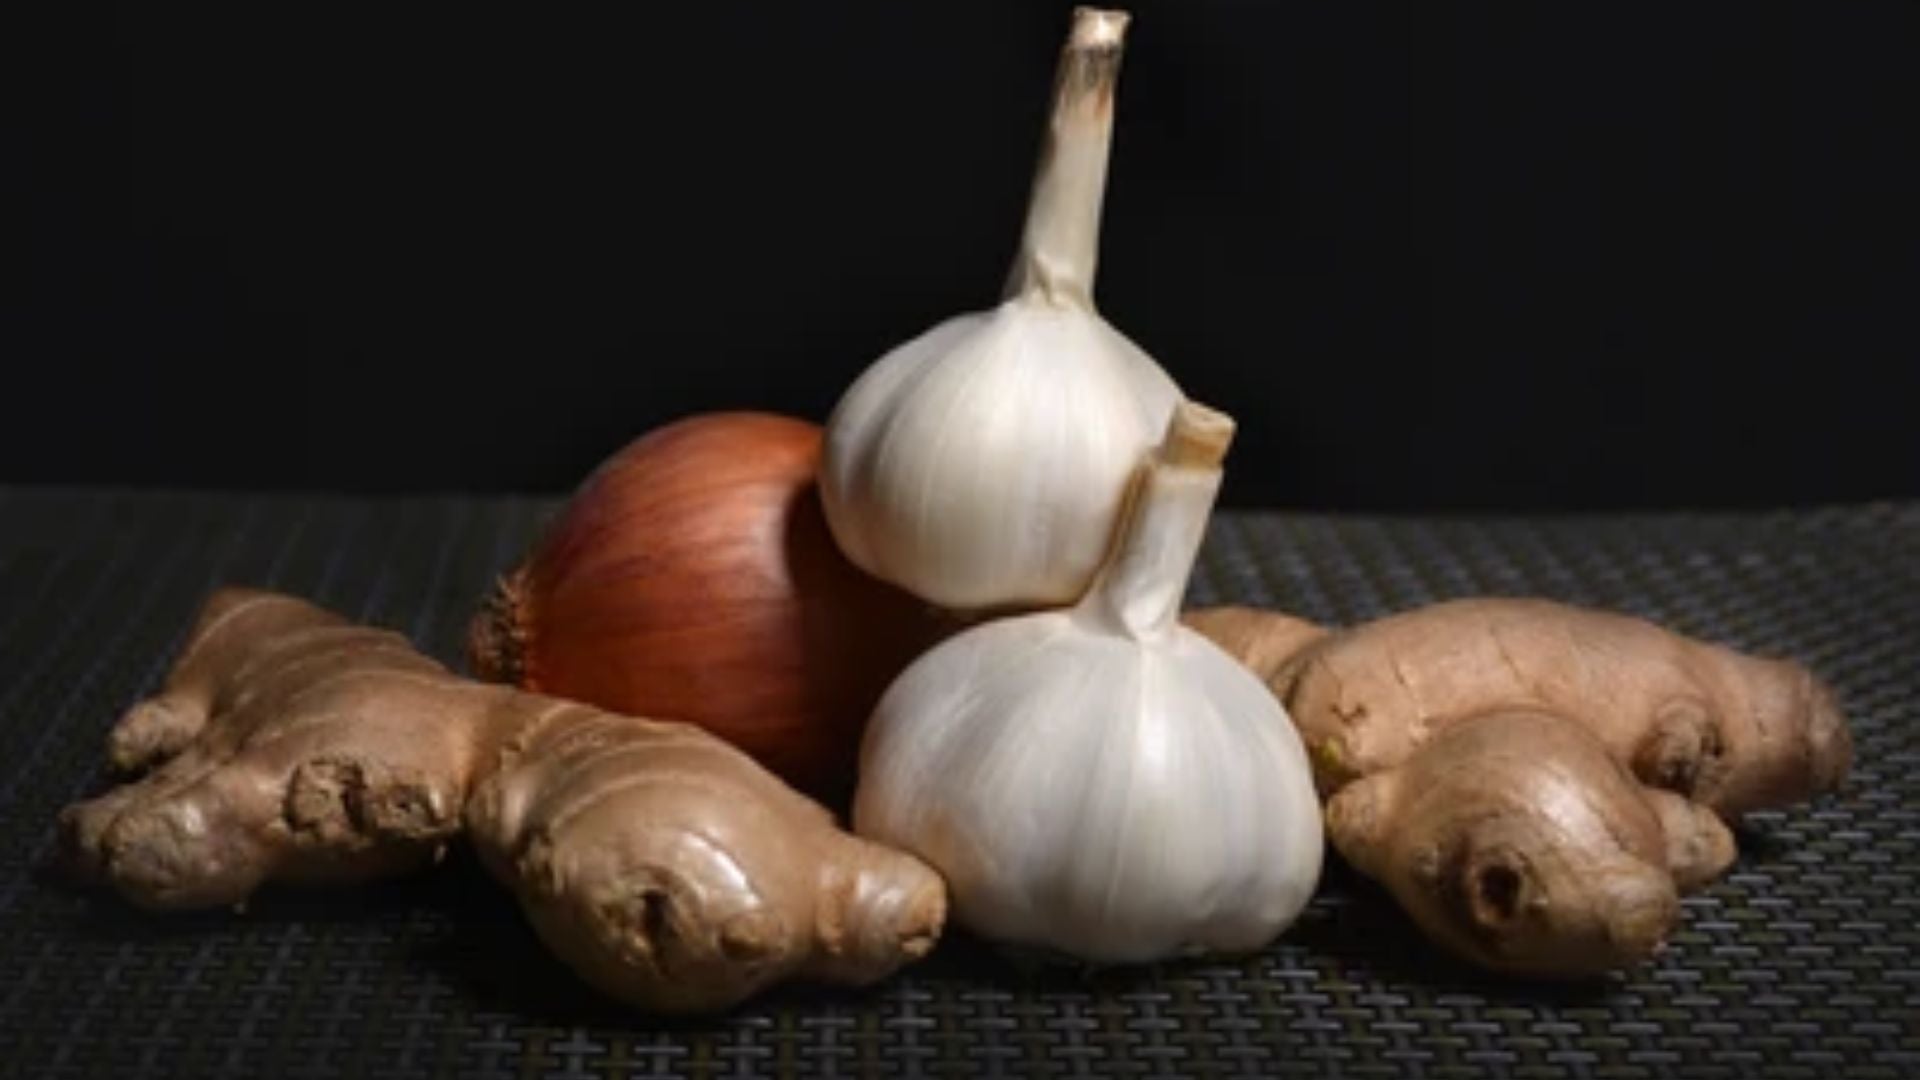 Ginger-garlic and onions